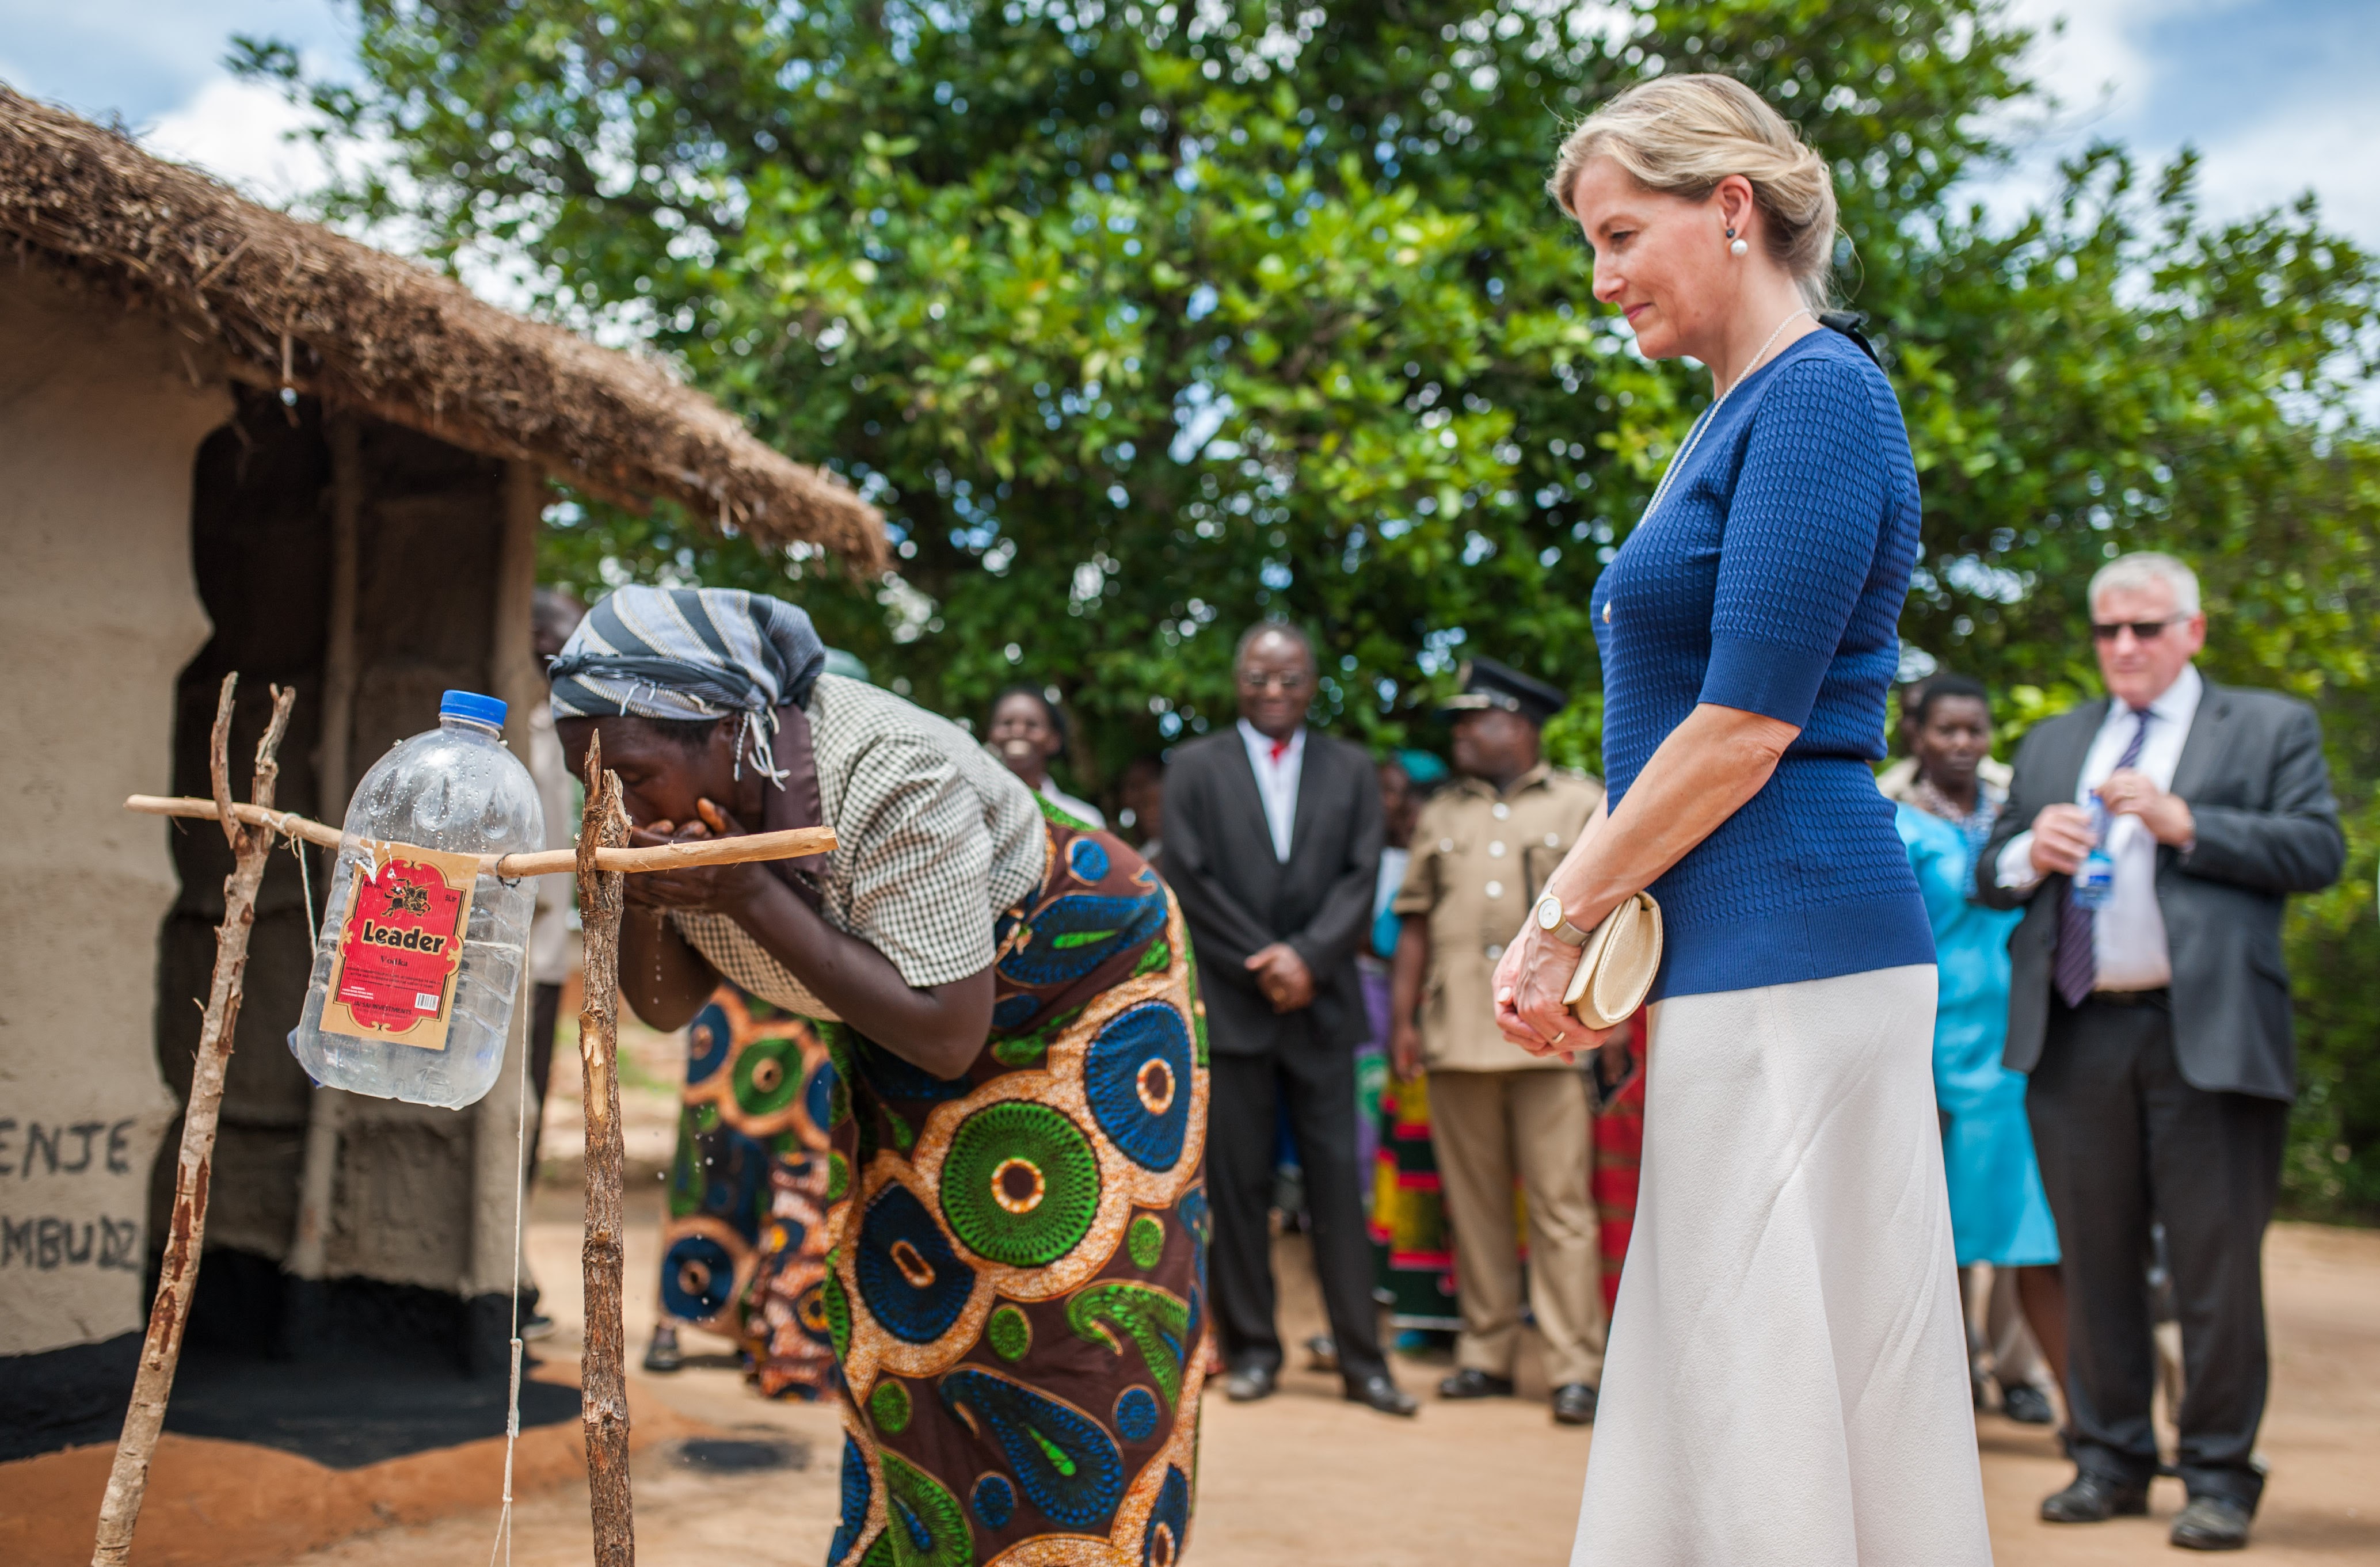 The Countess of Wessex visits Malawi to help eliminate avoidable blindness